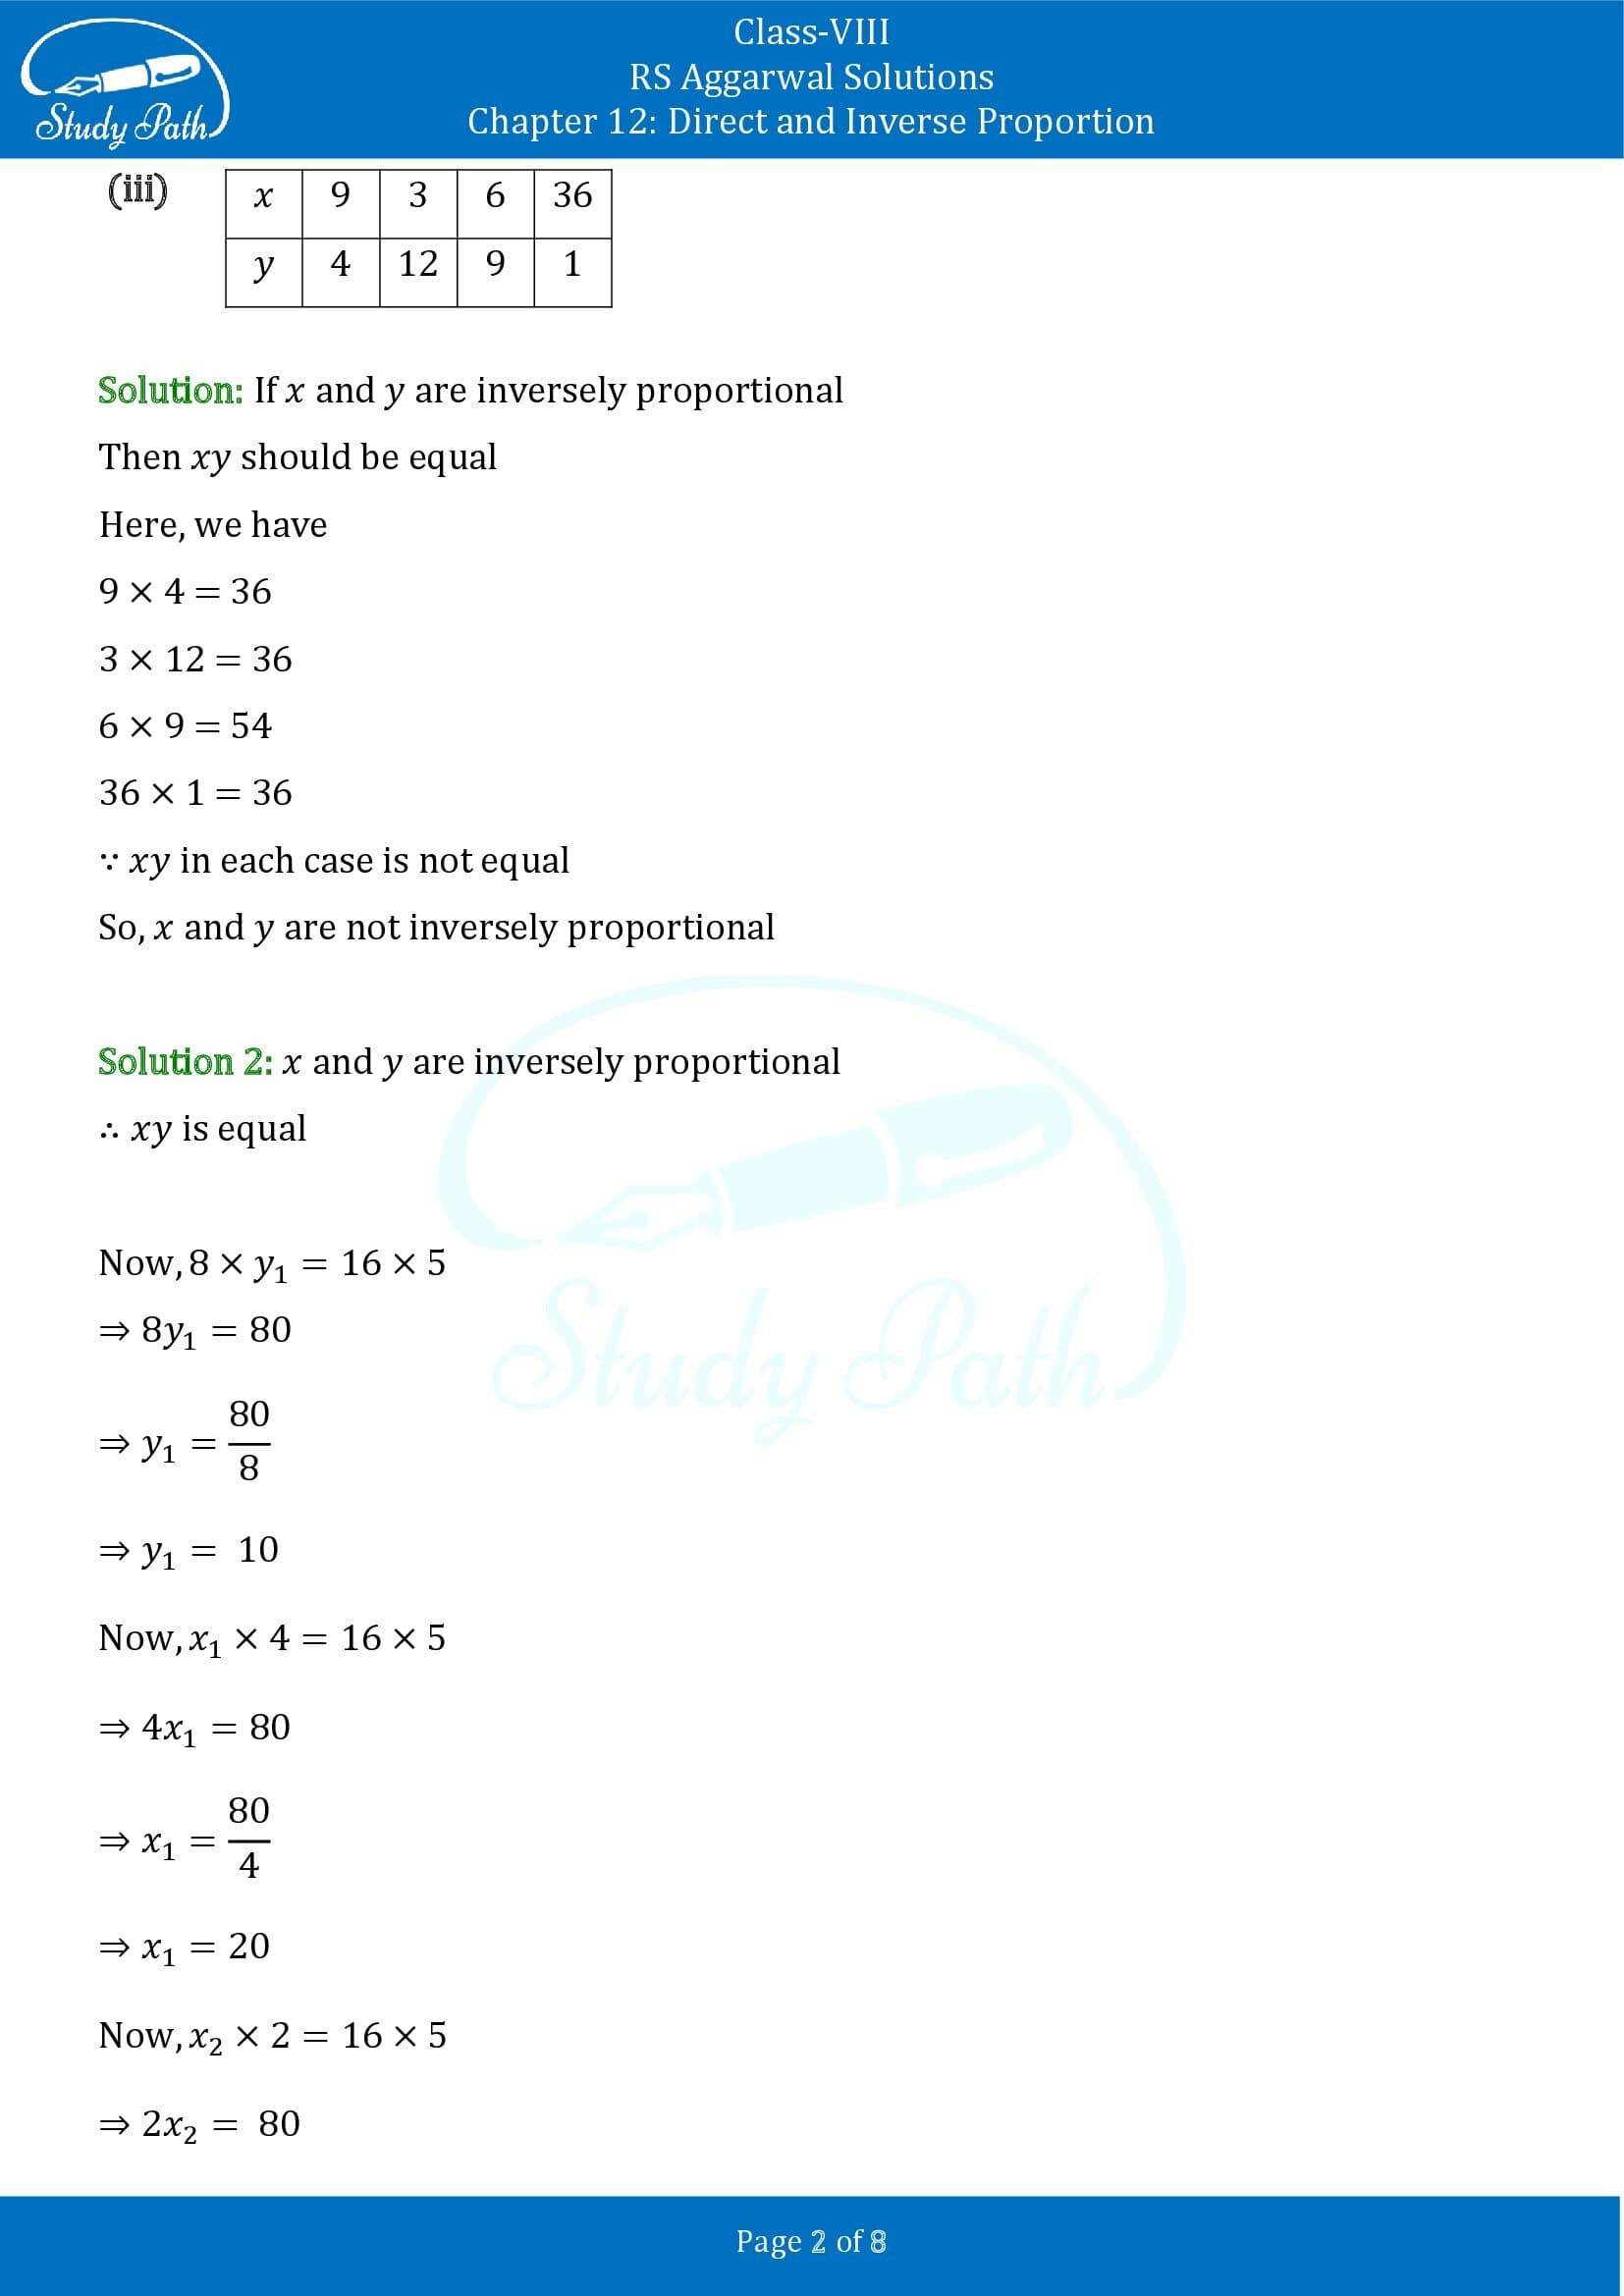 RS Aggarwal Solutions Class 8 Chapter 12 Direct and Inverse Proportion Exercise 12B 00002